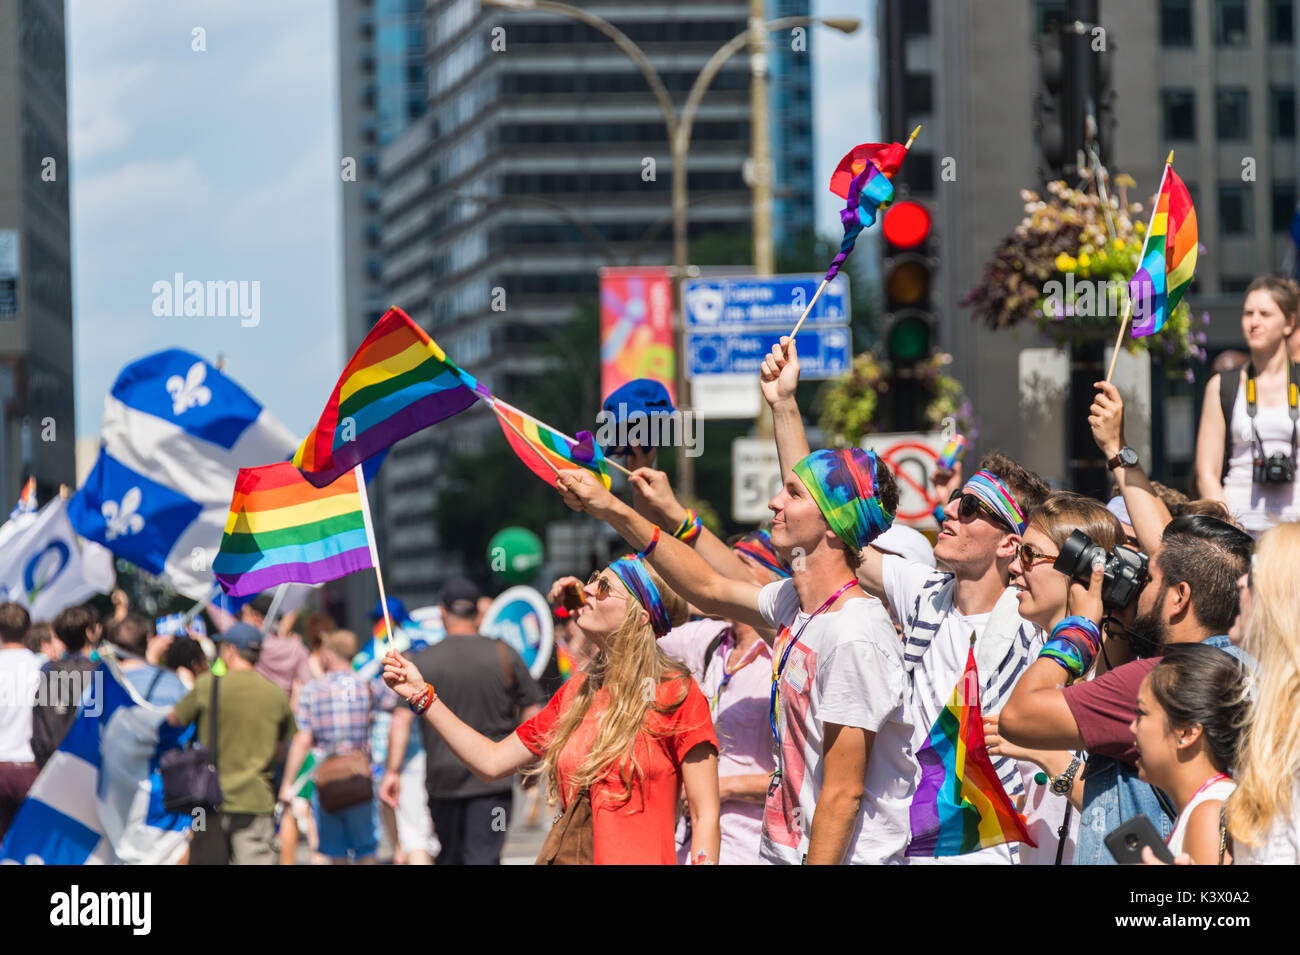 Montreal, CANADA - 20 August 2017: Spectators at the Montreal Gay Pride Parade cheering the floats Stock Photo